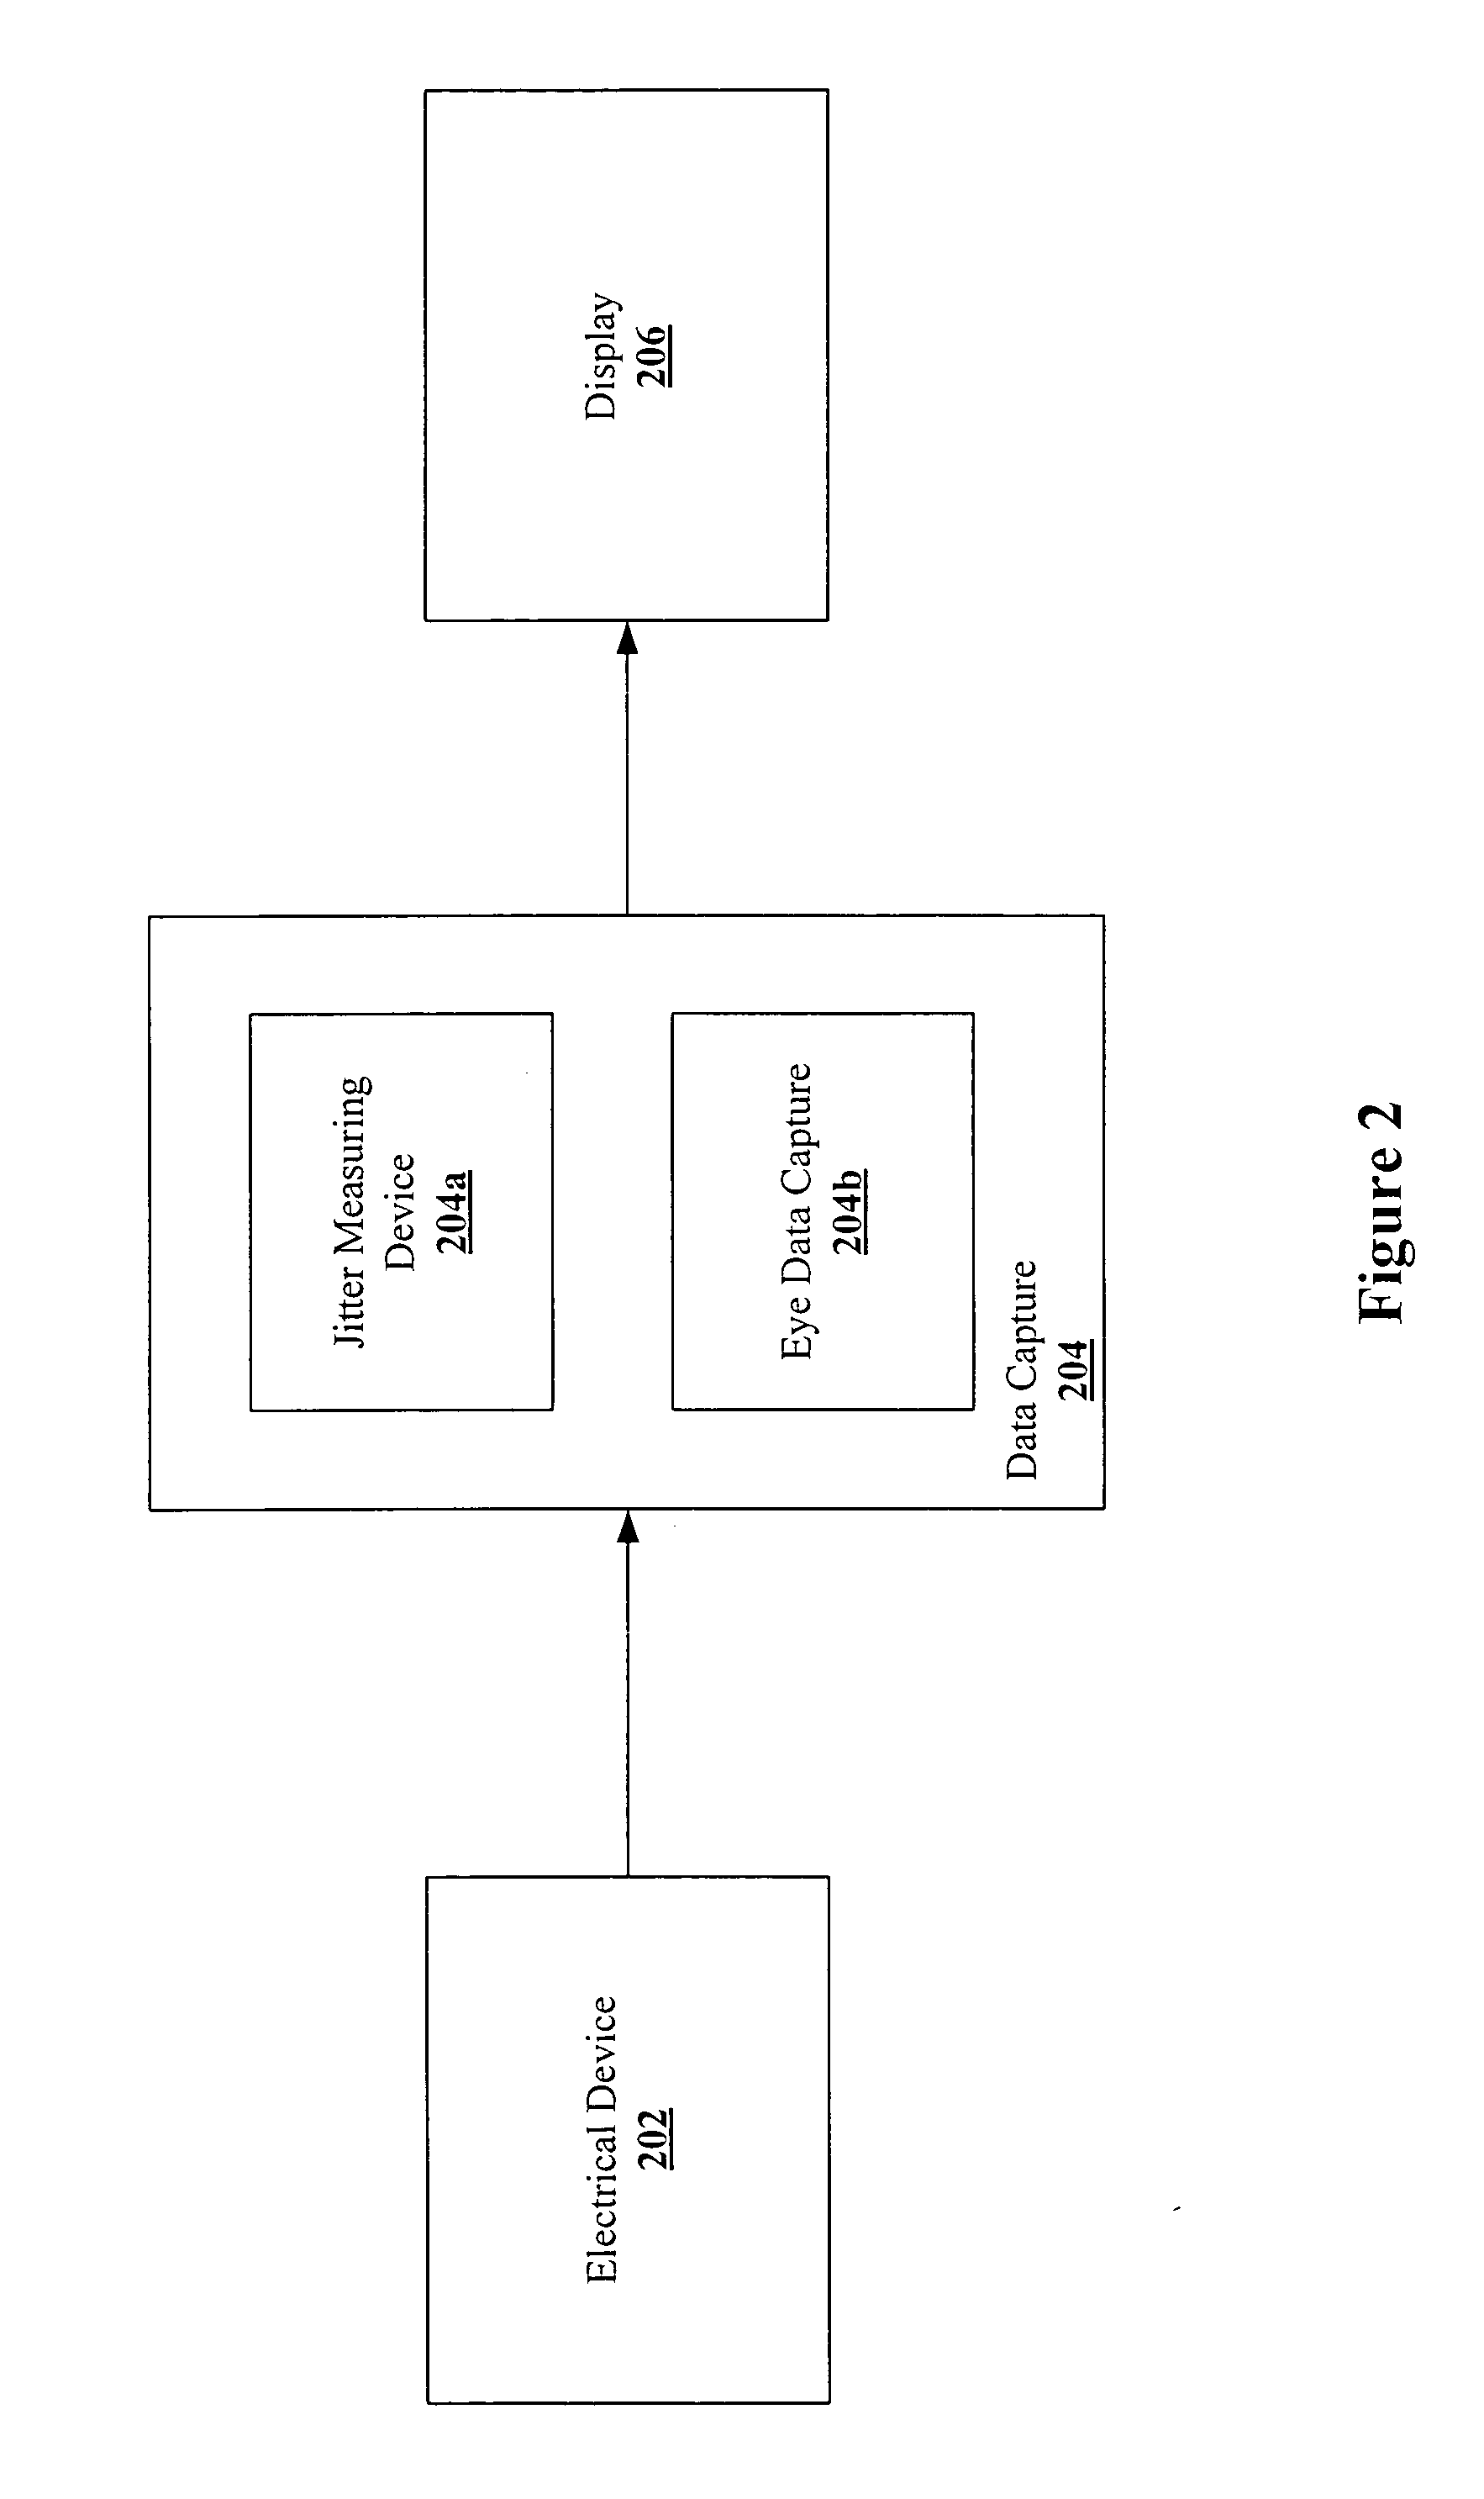 Simultaneous display of eye diagram and jitter profile during device characterization